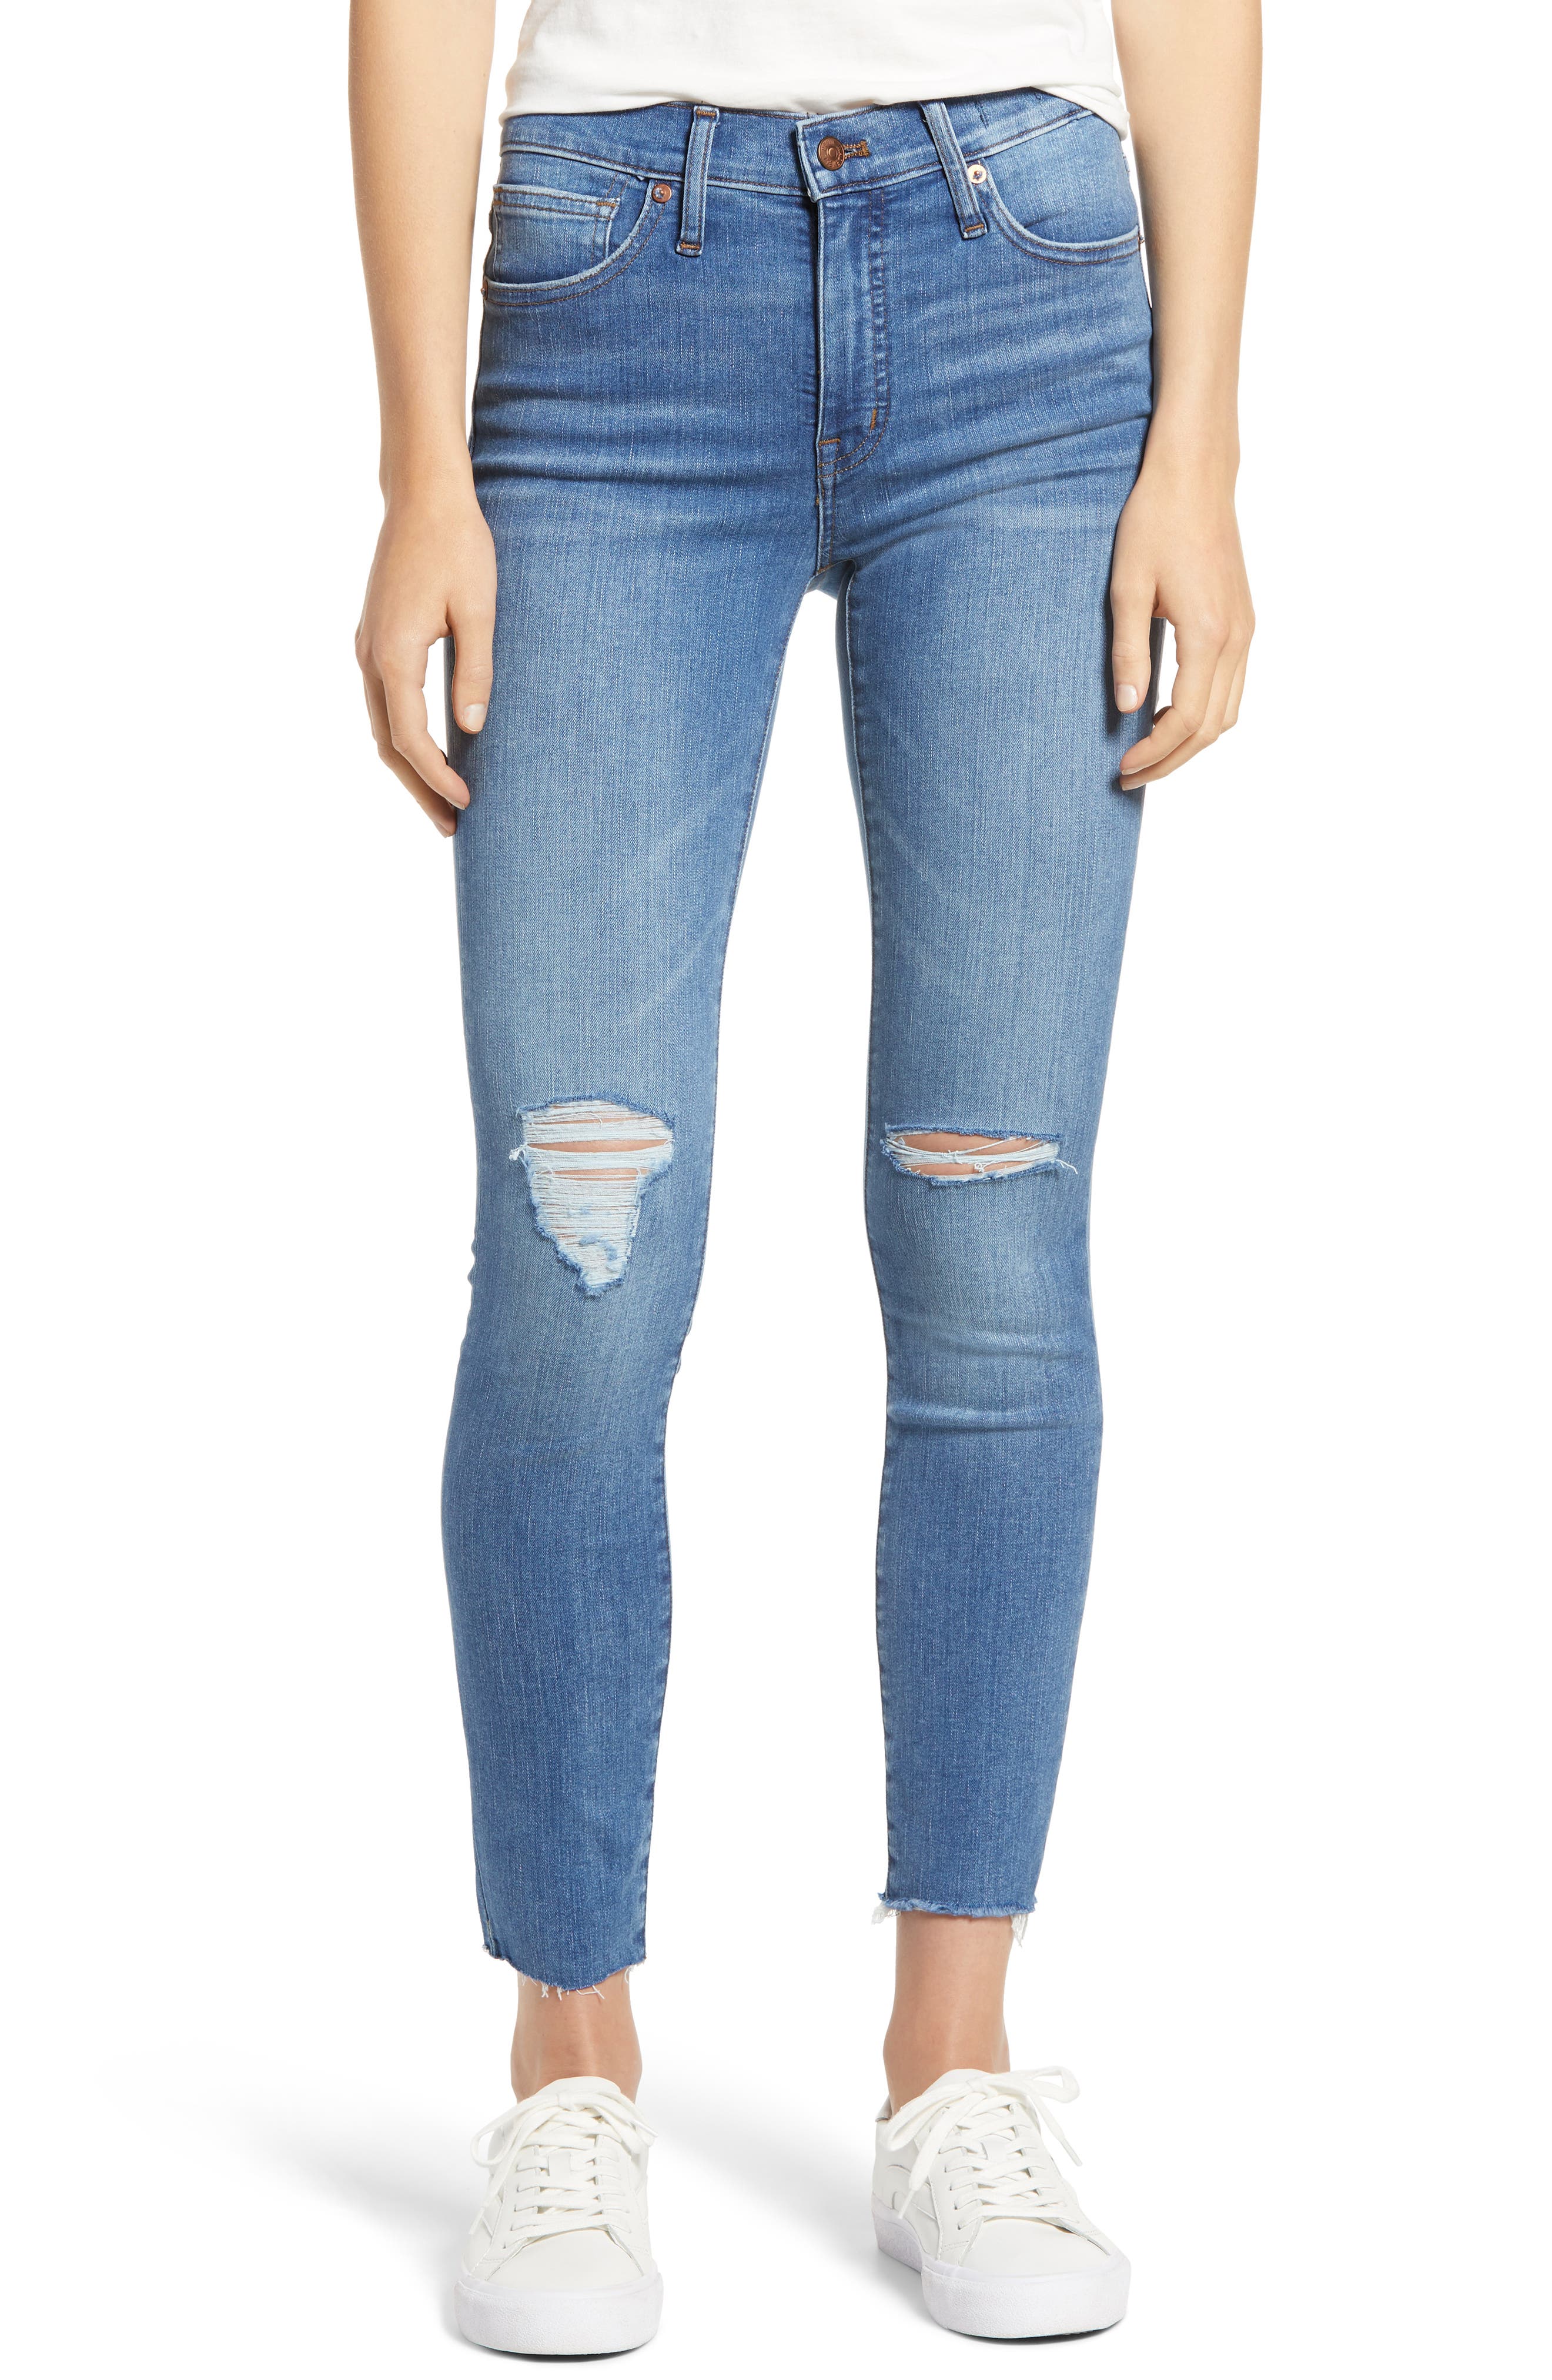 9 inch rise jeans